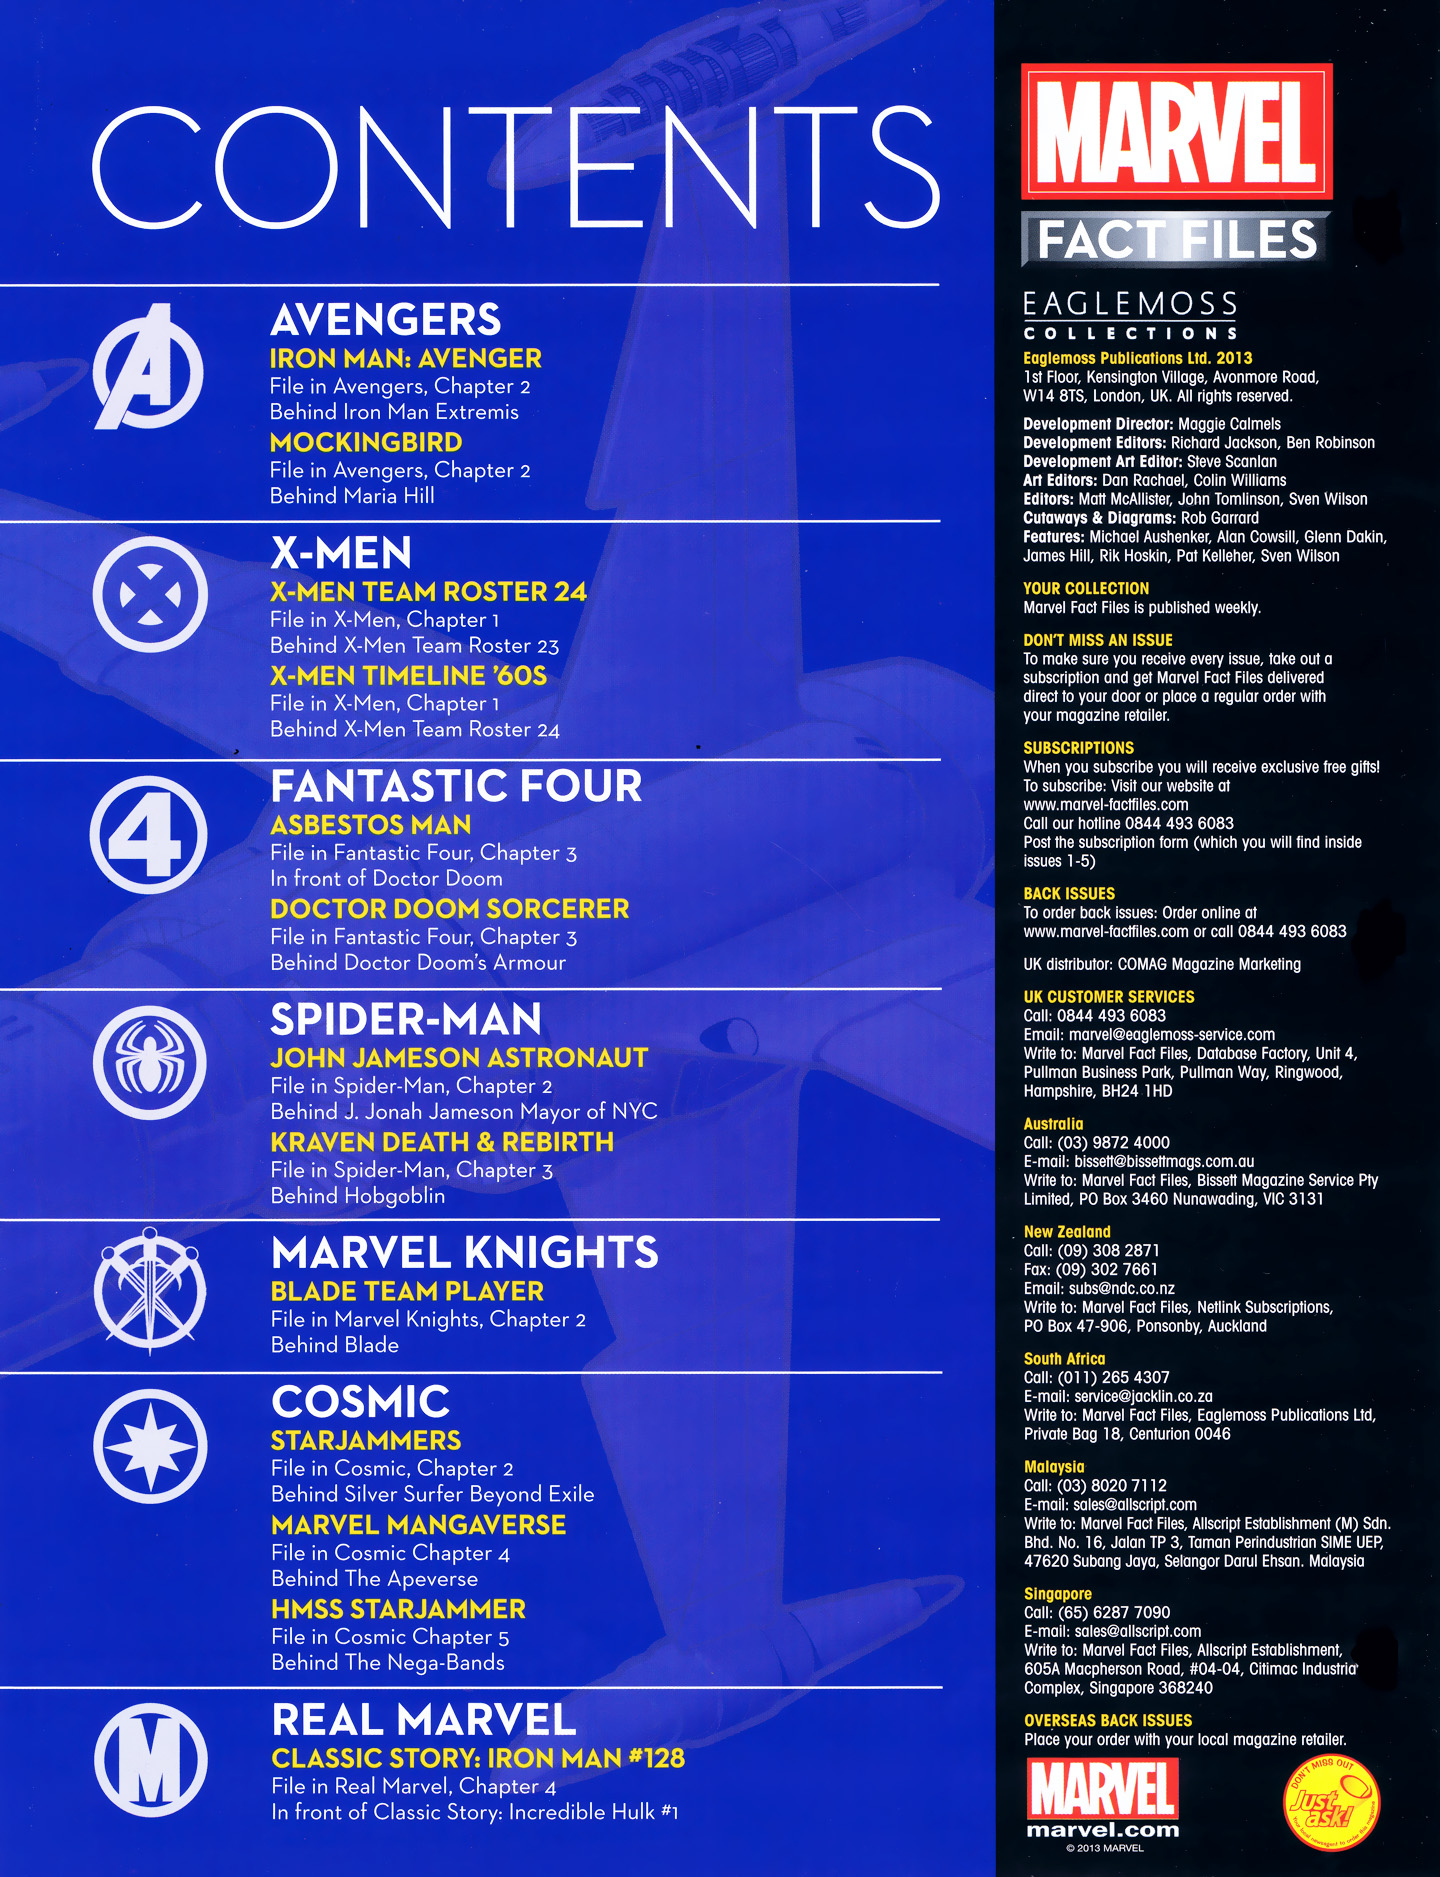 Read online Marvel Fact Files comic -  Issue #24 - 2